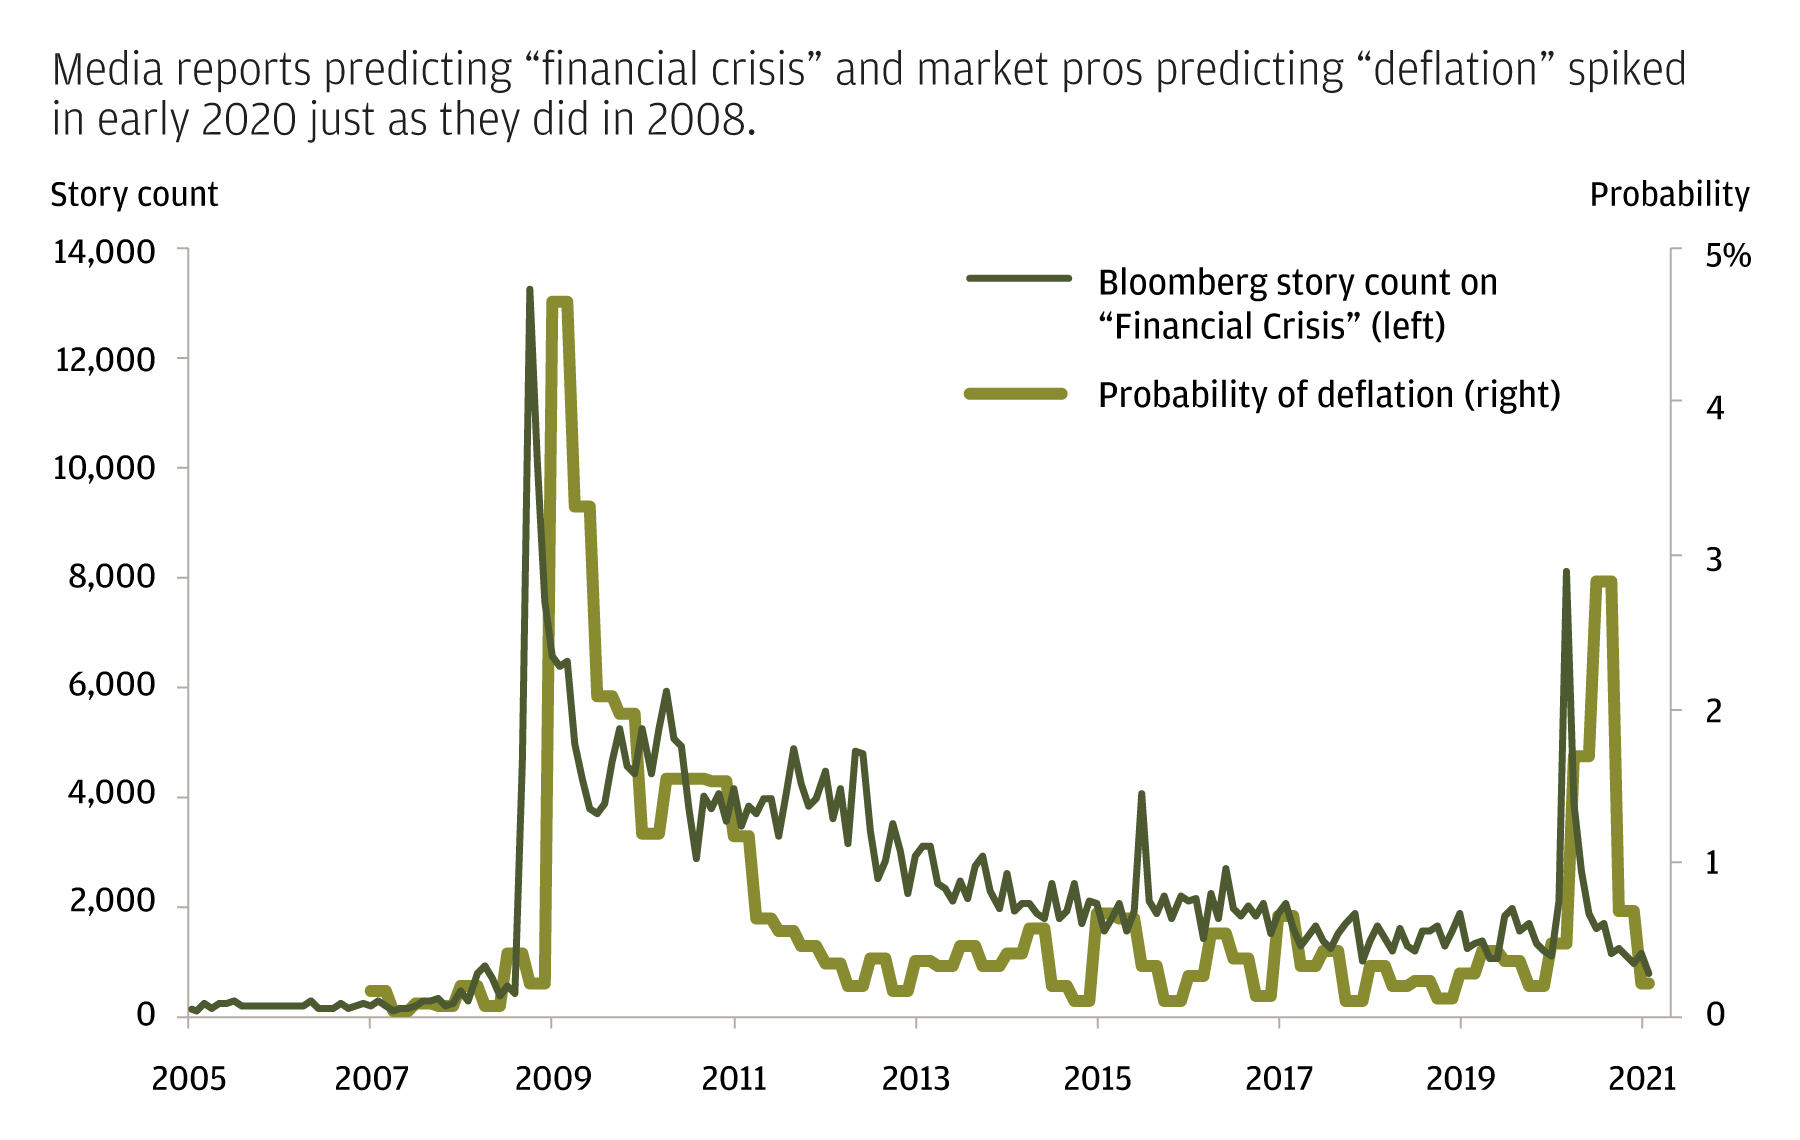 Media reports predicting “financial crisis” and market pros predicting “deflation” spiked in early 2020 just as they did in 2008.